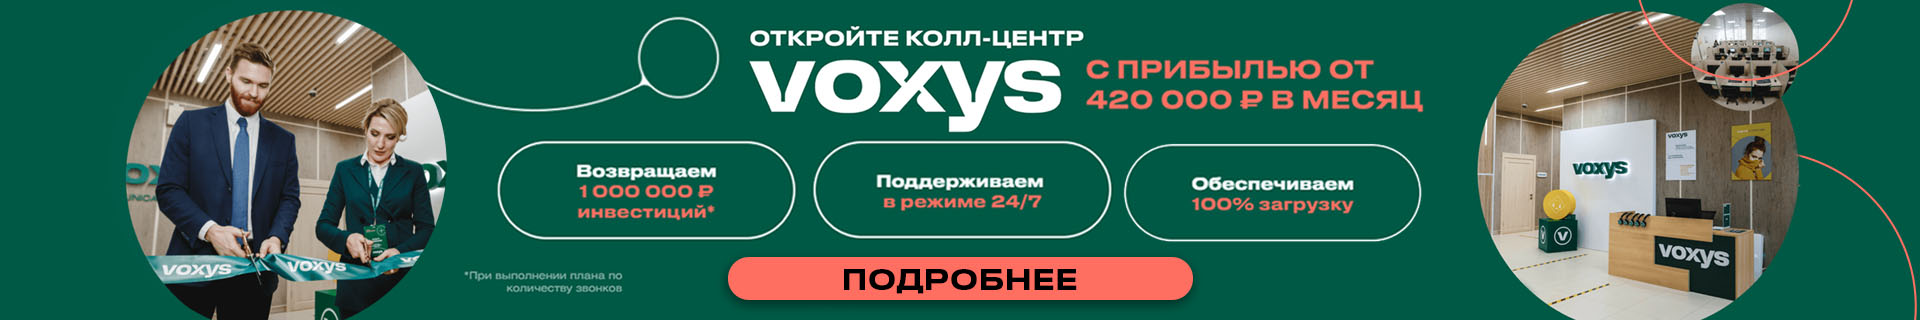 Франшиза колл-центра VOXYS